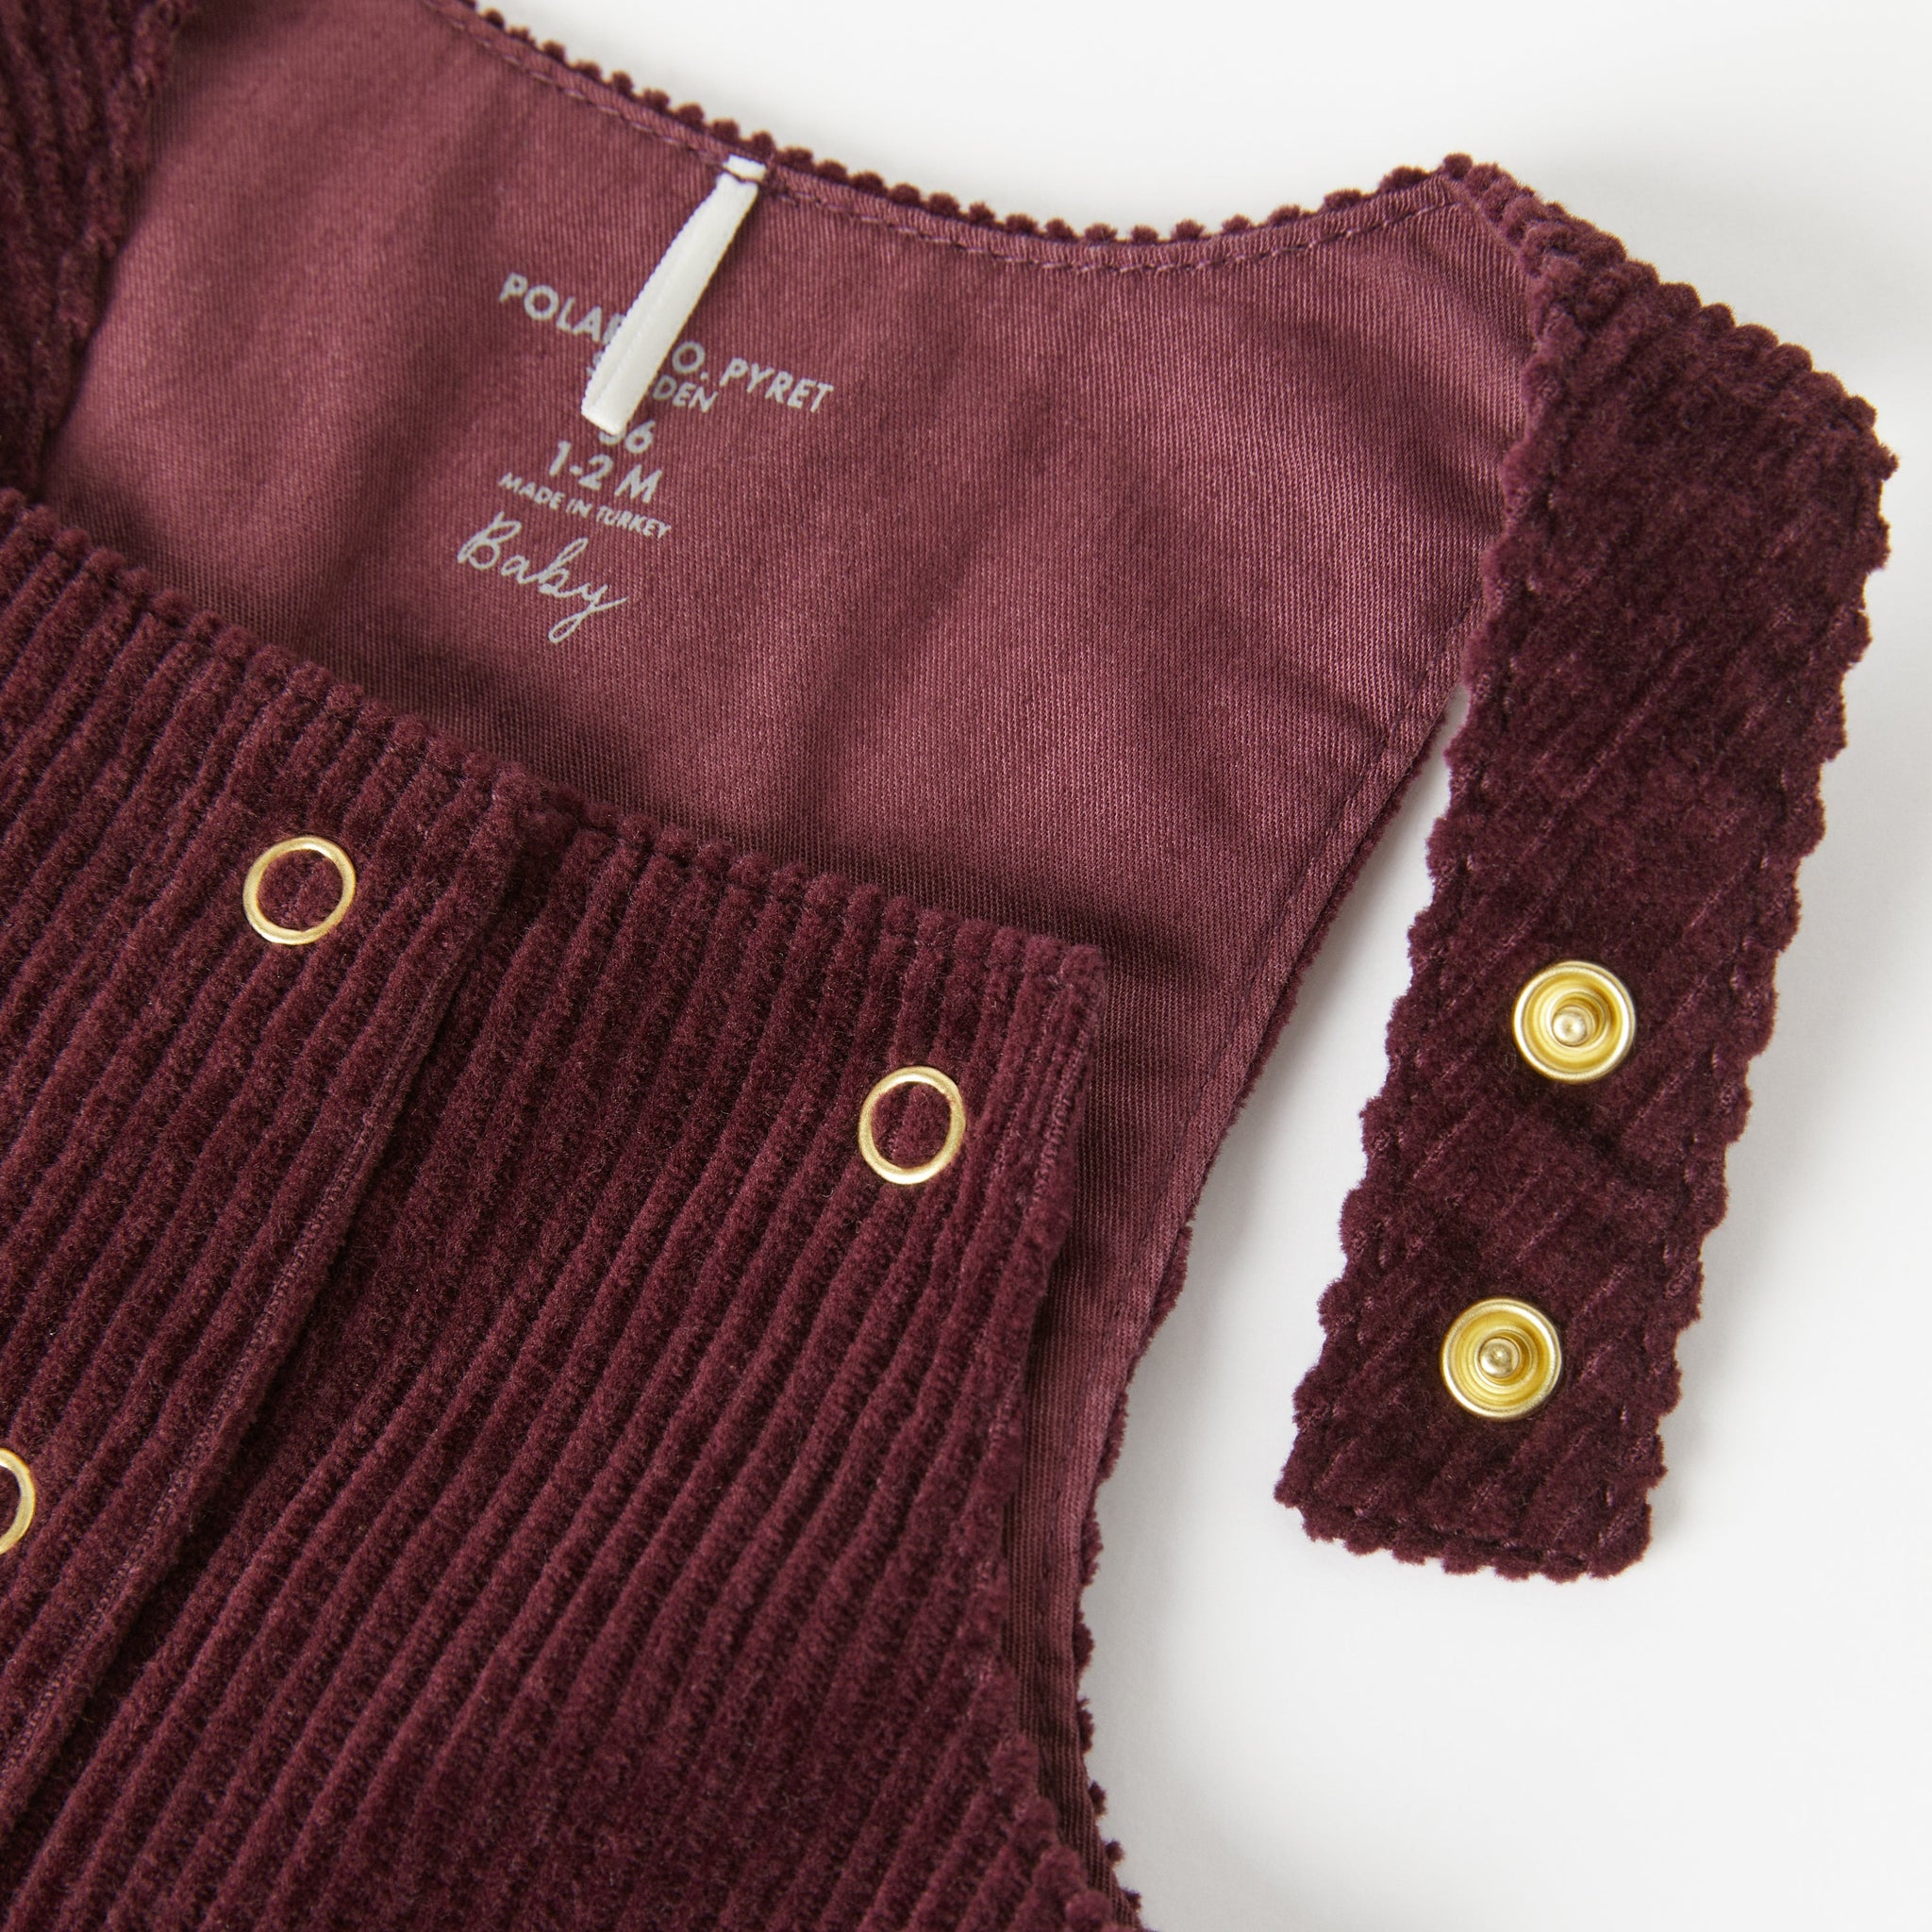 Corduroy Burgundy Baby Dress from the Polarn O. Pyret Kidswear collection. Ethically produced kids clothing.